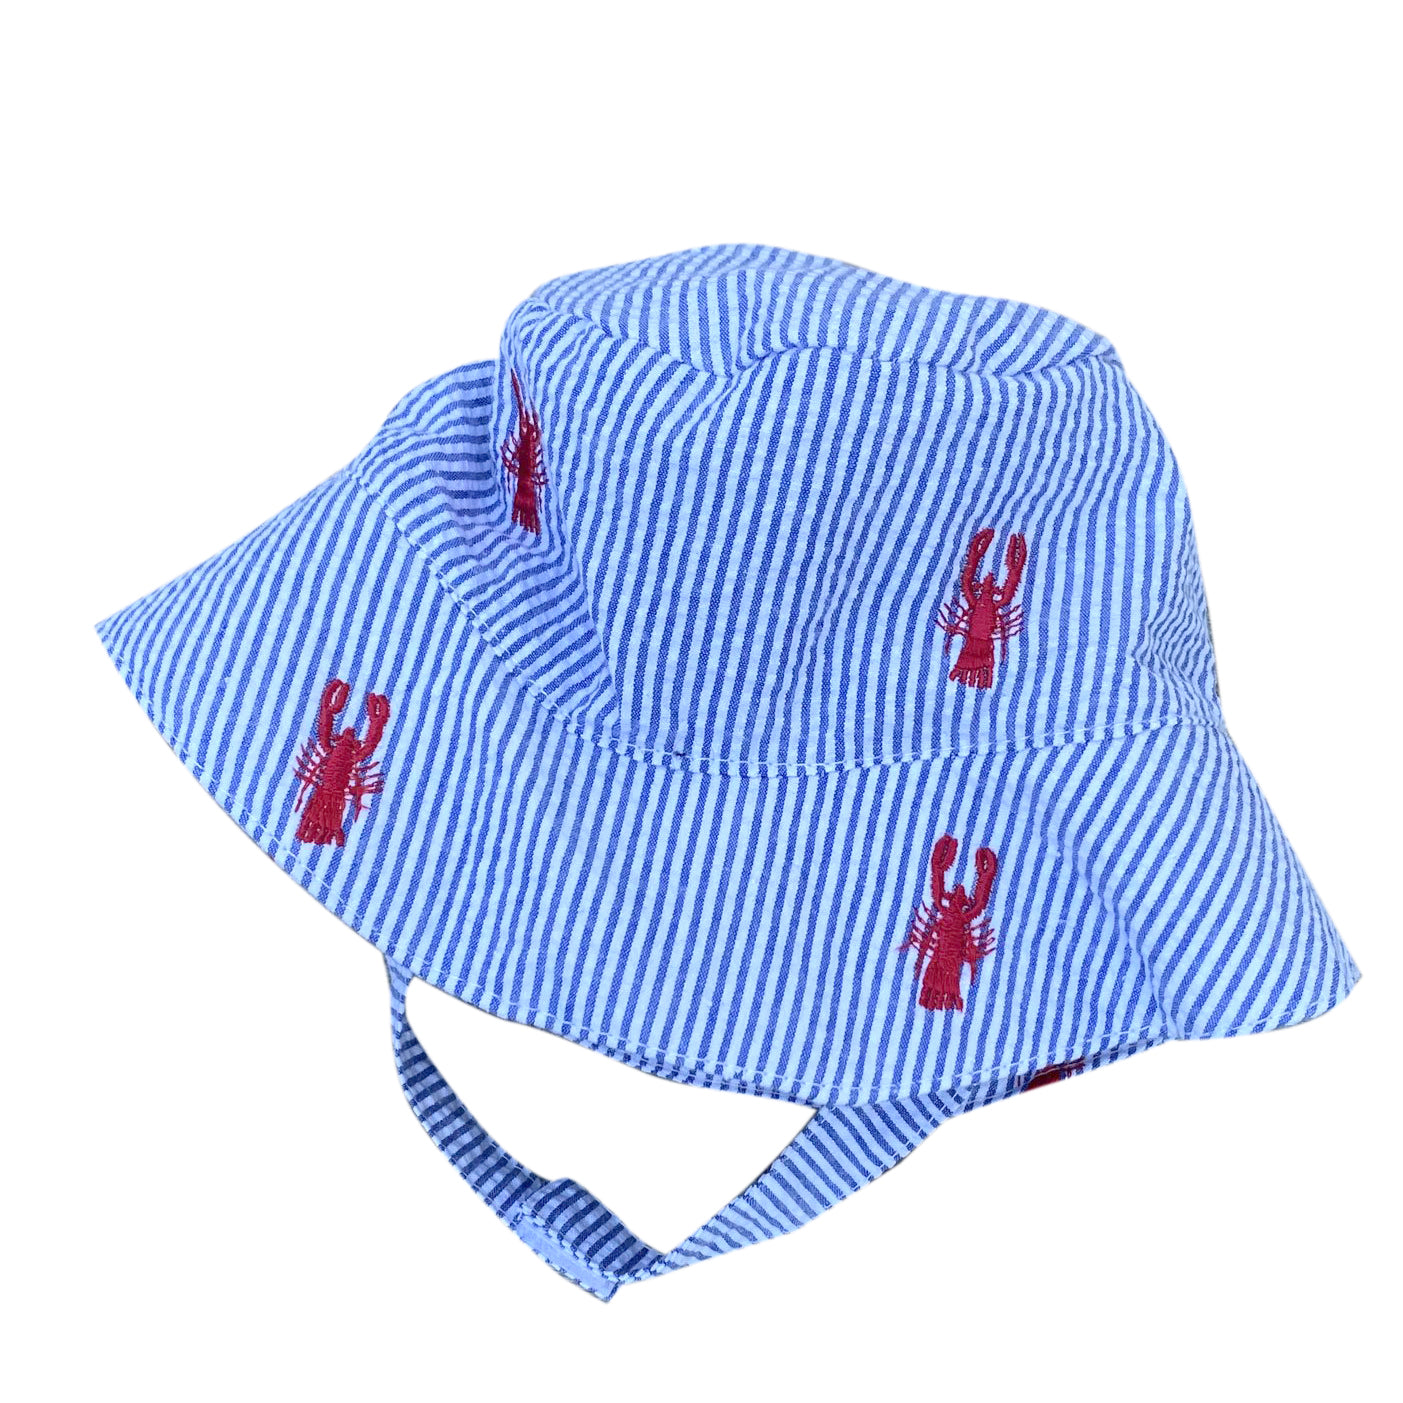 Blue Seersucker with Red Embroidered Lobsters Baby Bucket Hat